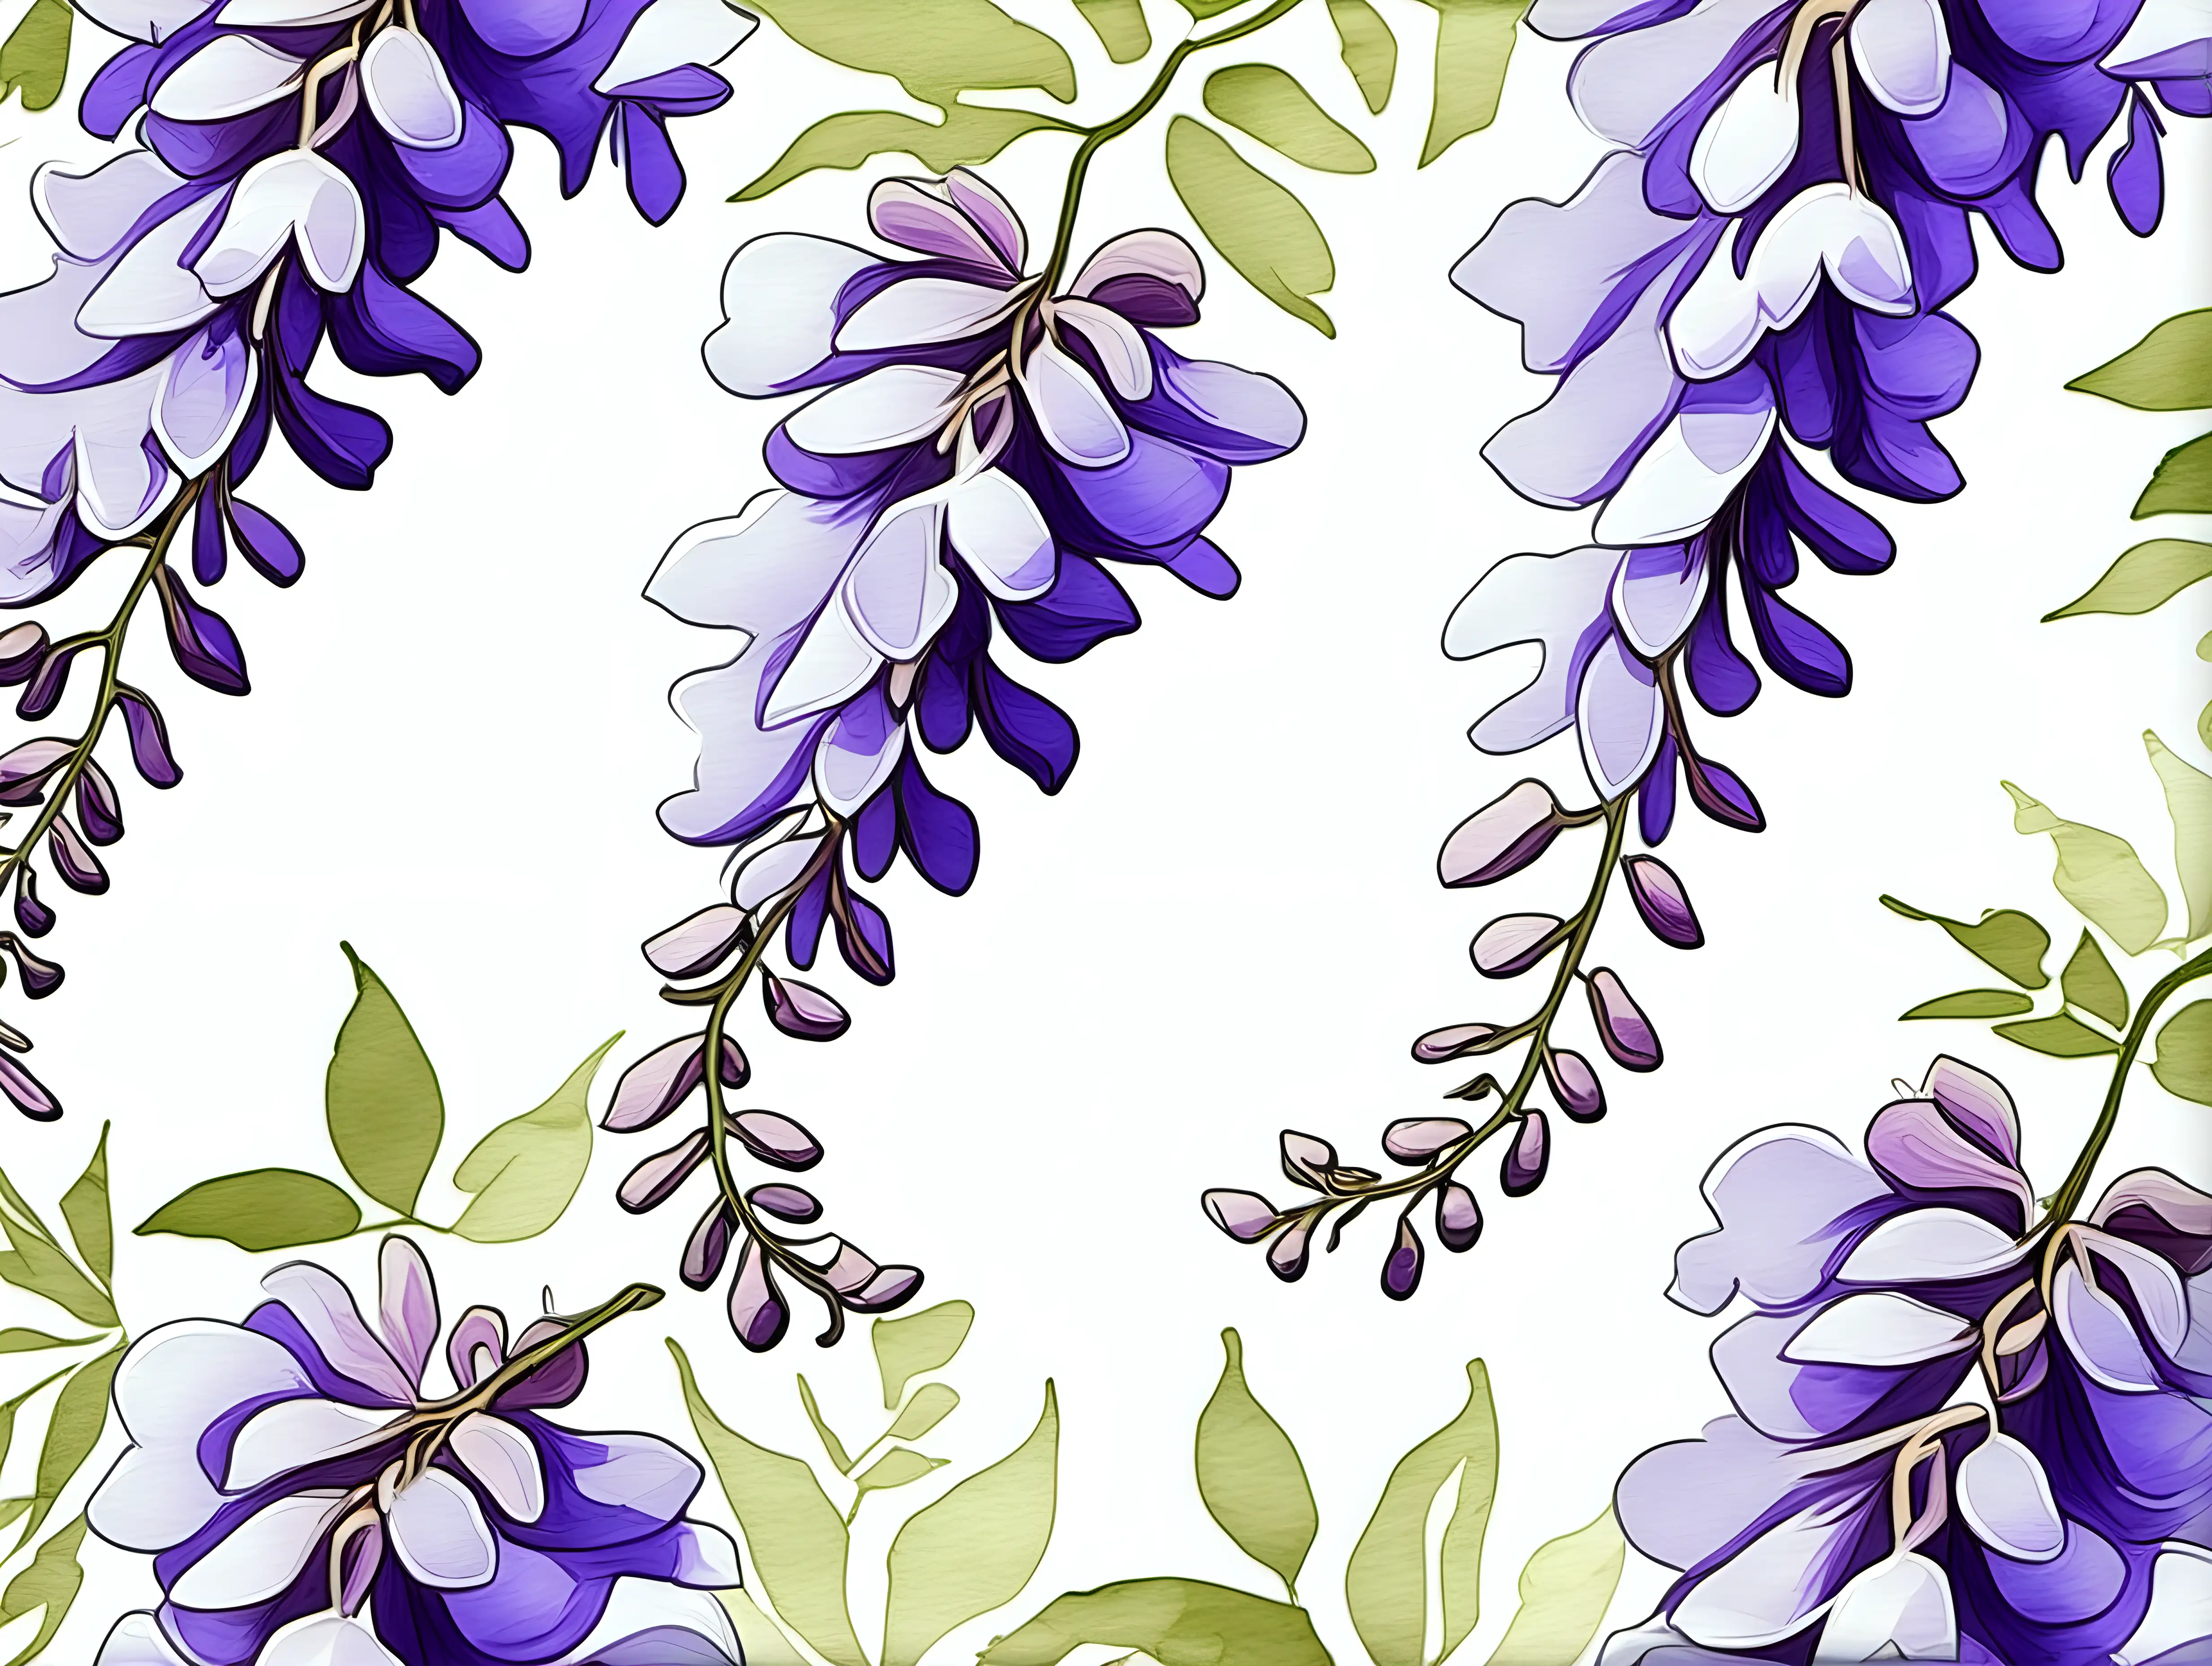 Pastel Watercolor American Wisteria Flowers Clipart on White Background Andy Warhol Inspired